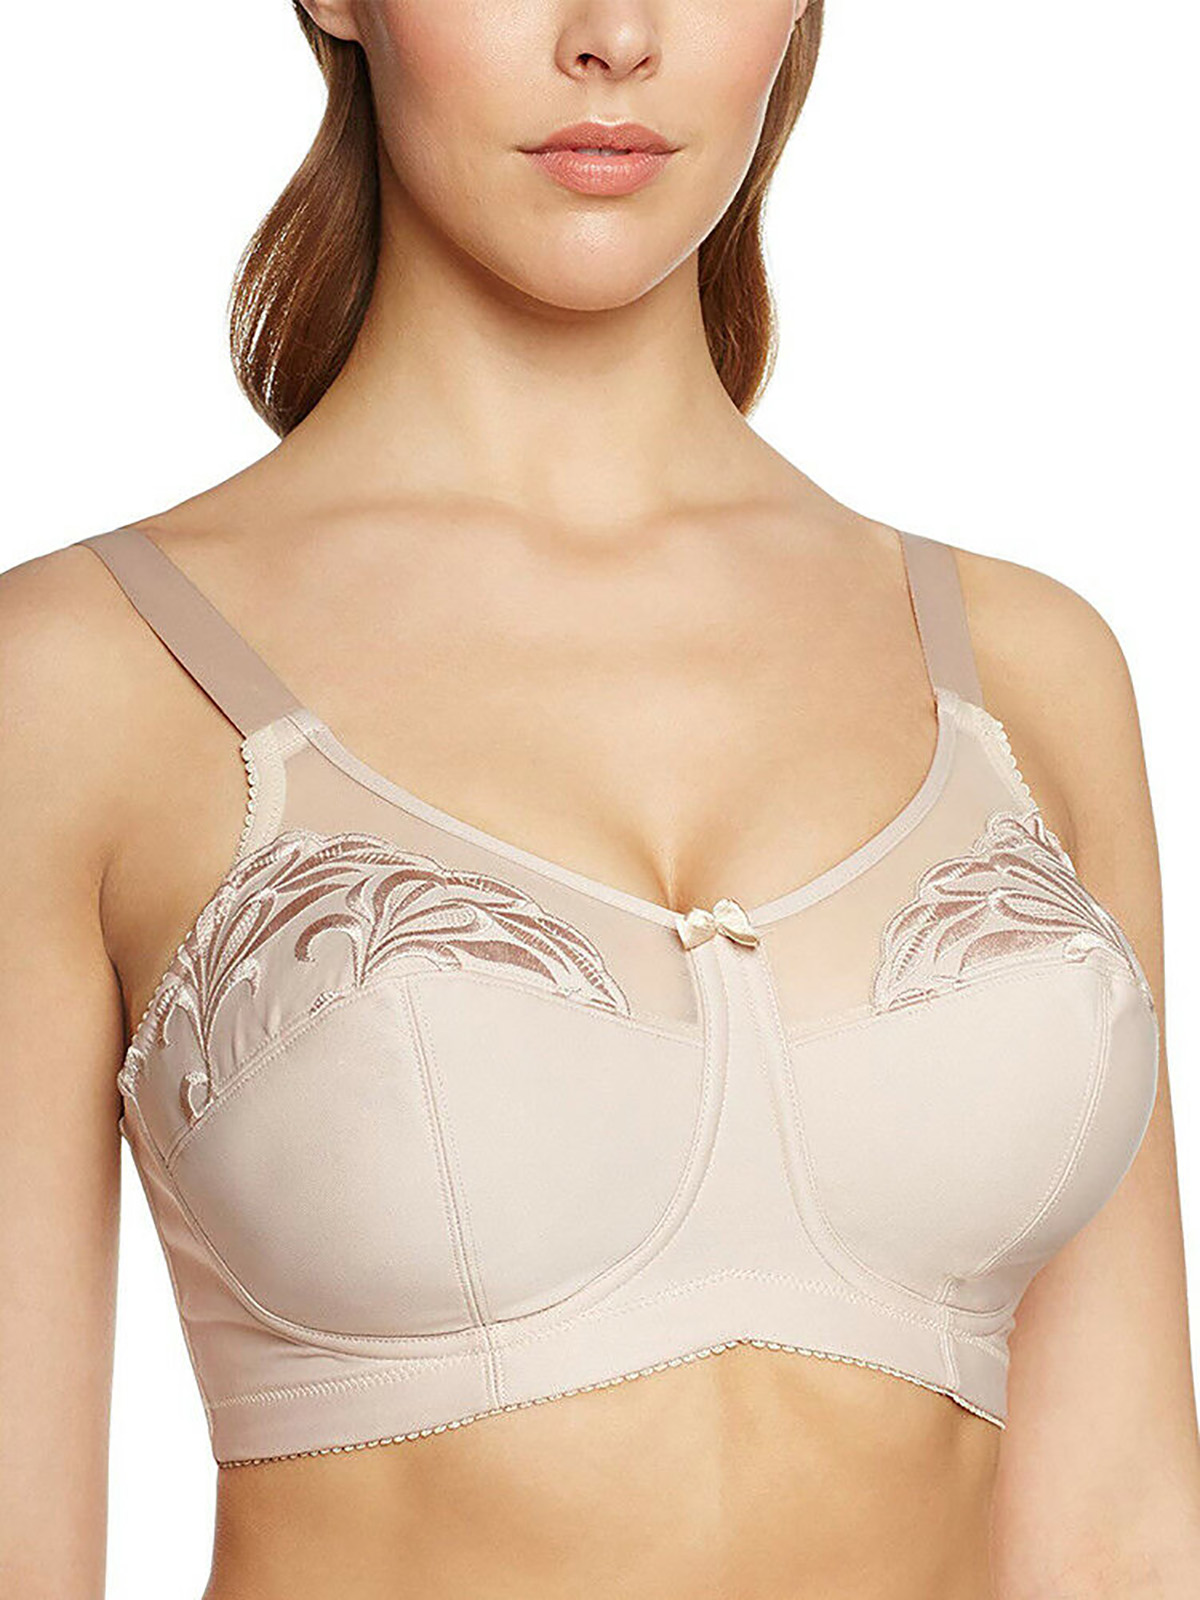 Naturana - - Naturana NUDE Non-Wired Soft Full Cup Bra - Size 38 to 40 (DD  cup)